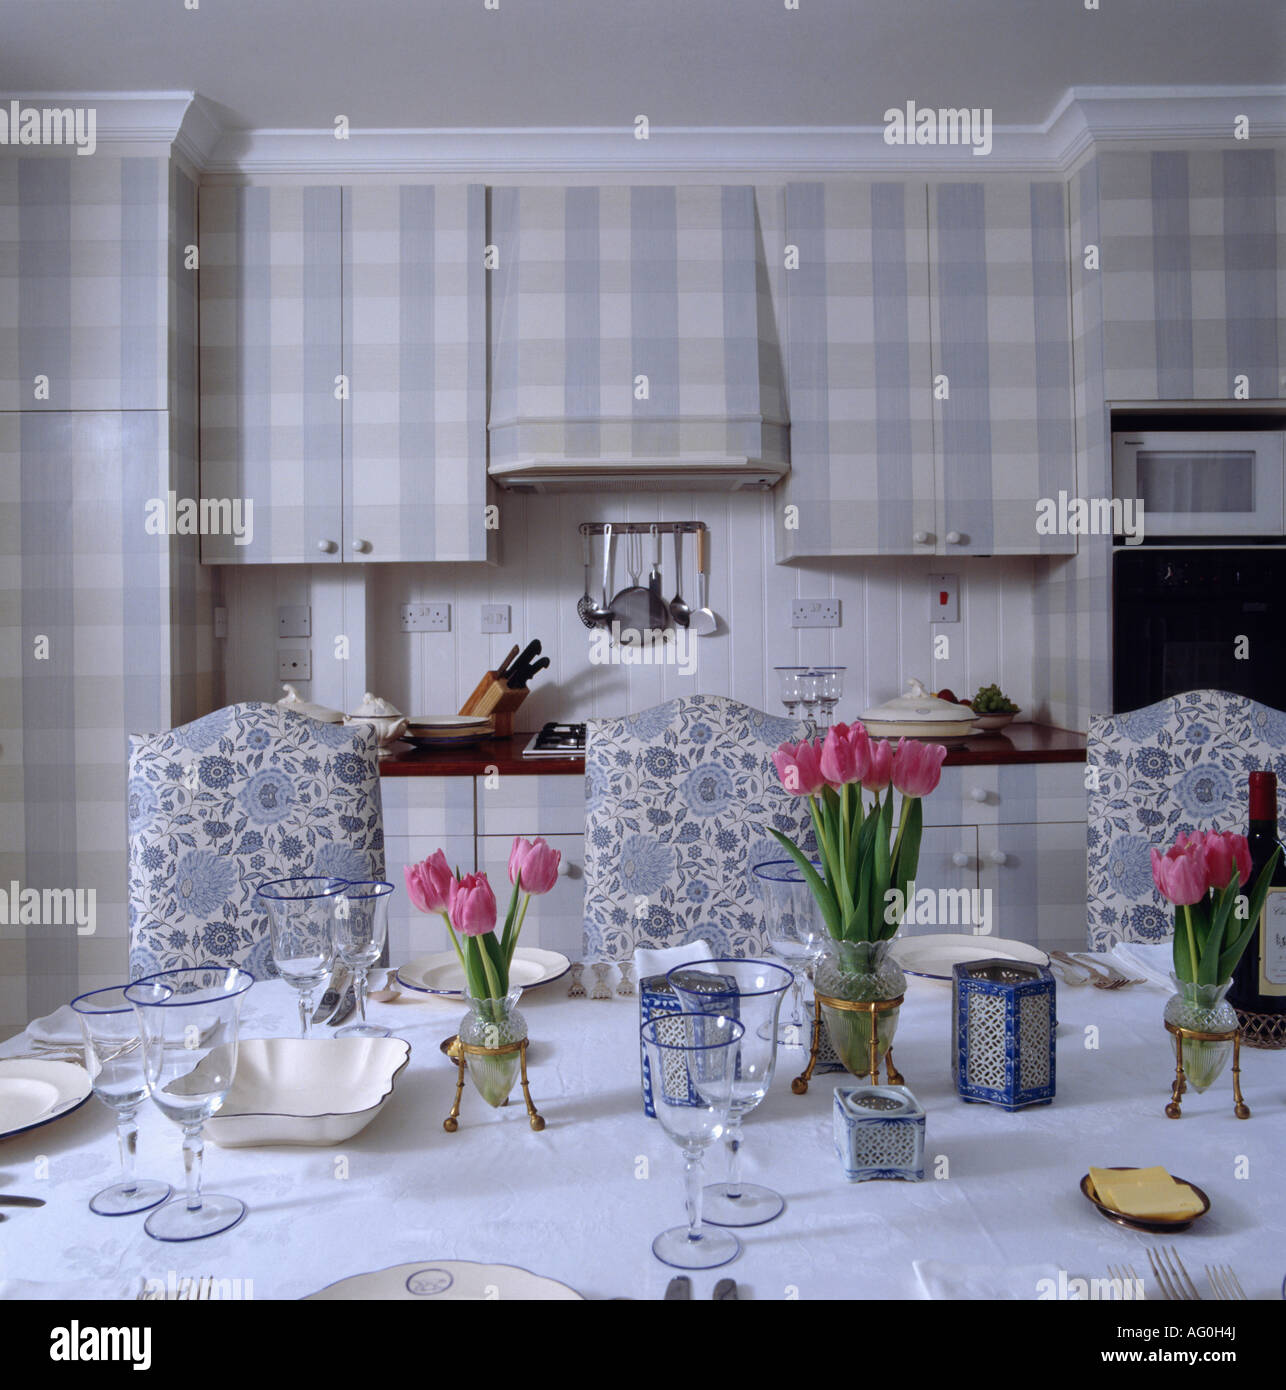 Pink Tulips On Dining Table In Kitchen With Blue Floral